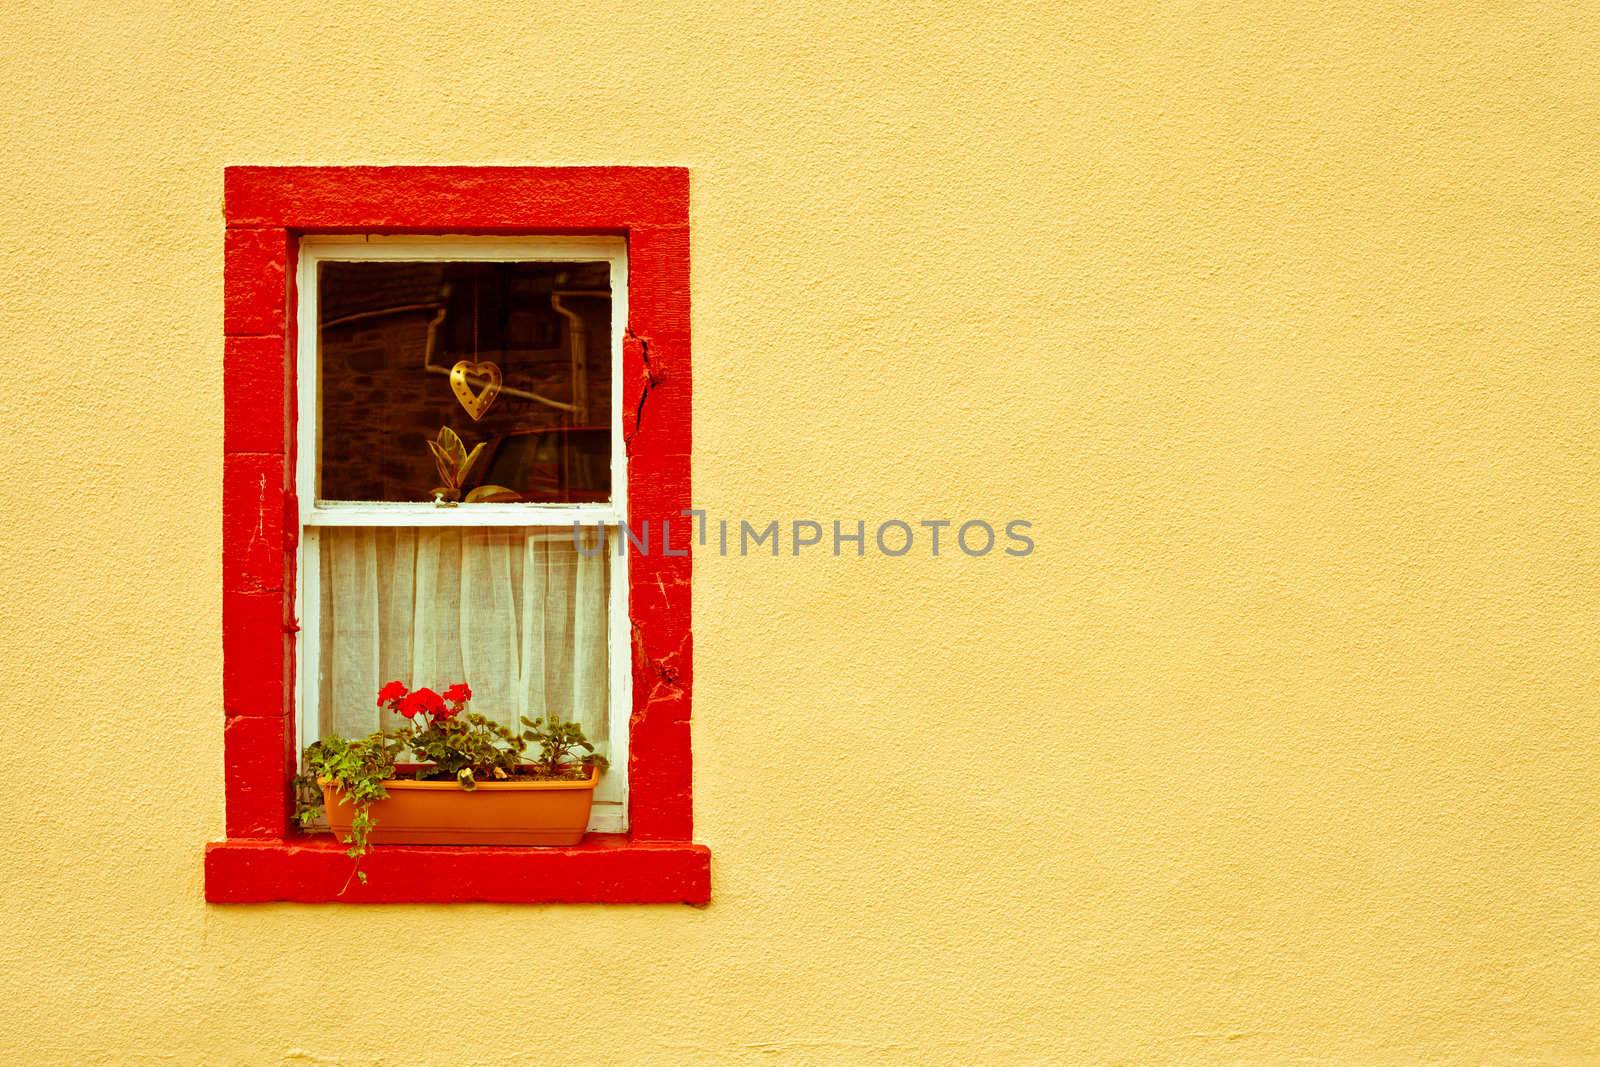 vibrant red window frame in a yellow wall